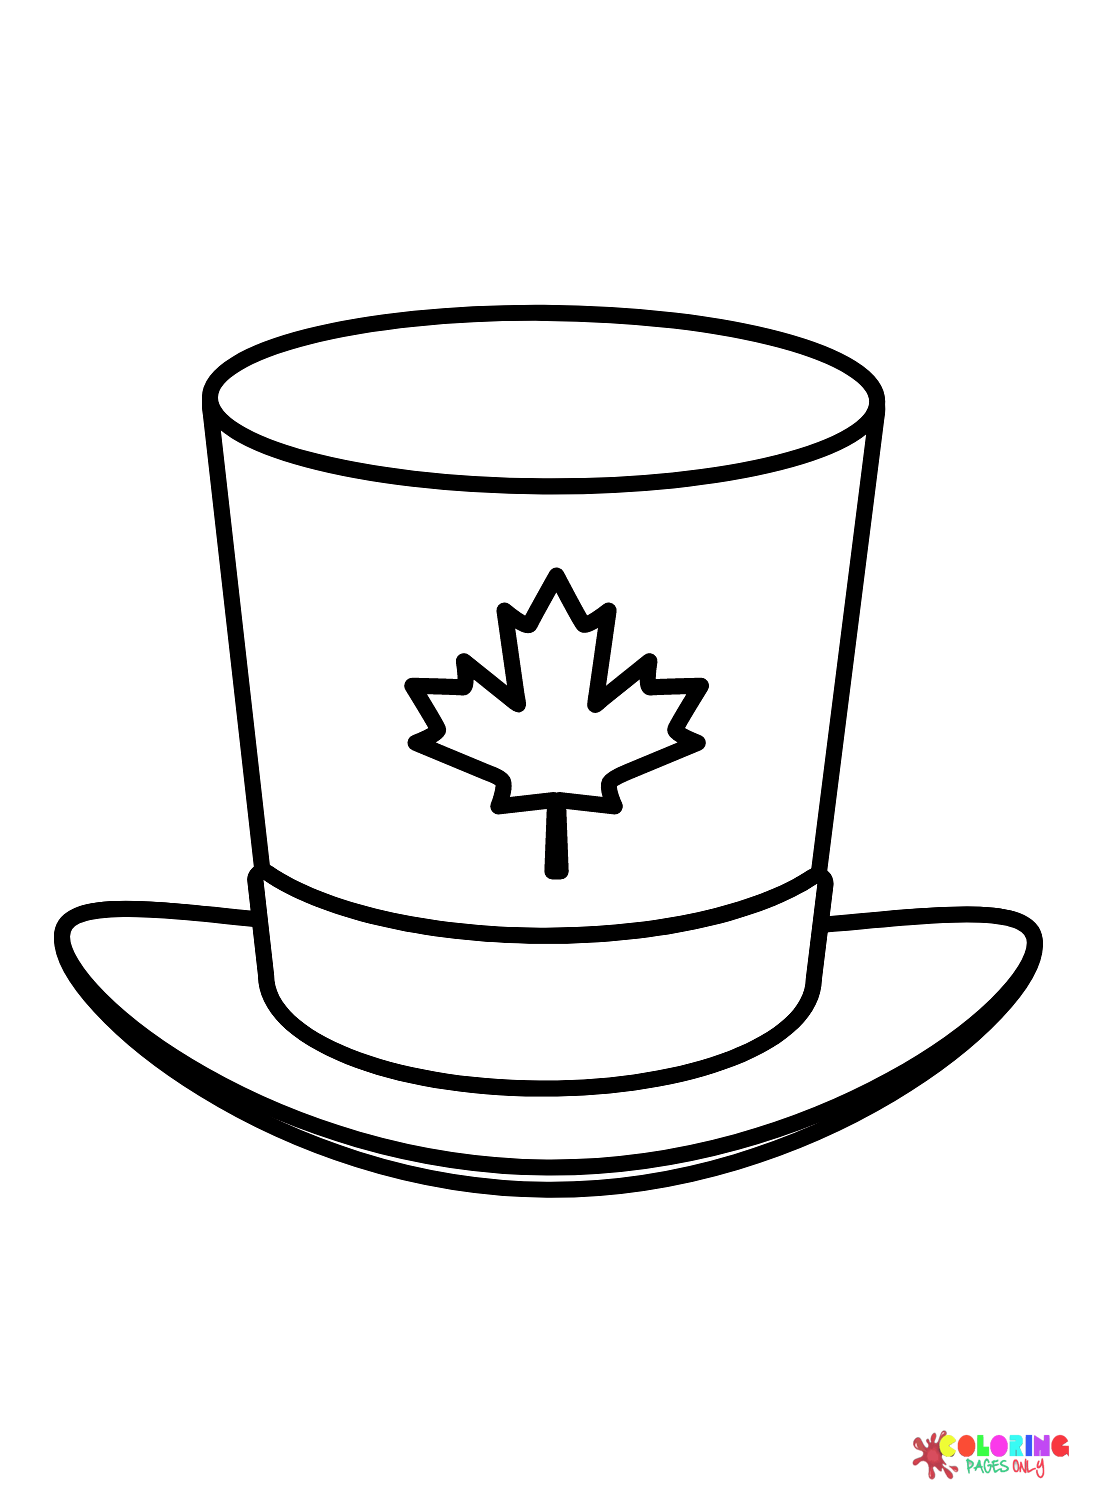 Top Hat in Canada Day from Canada Day